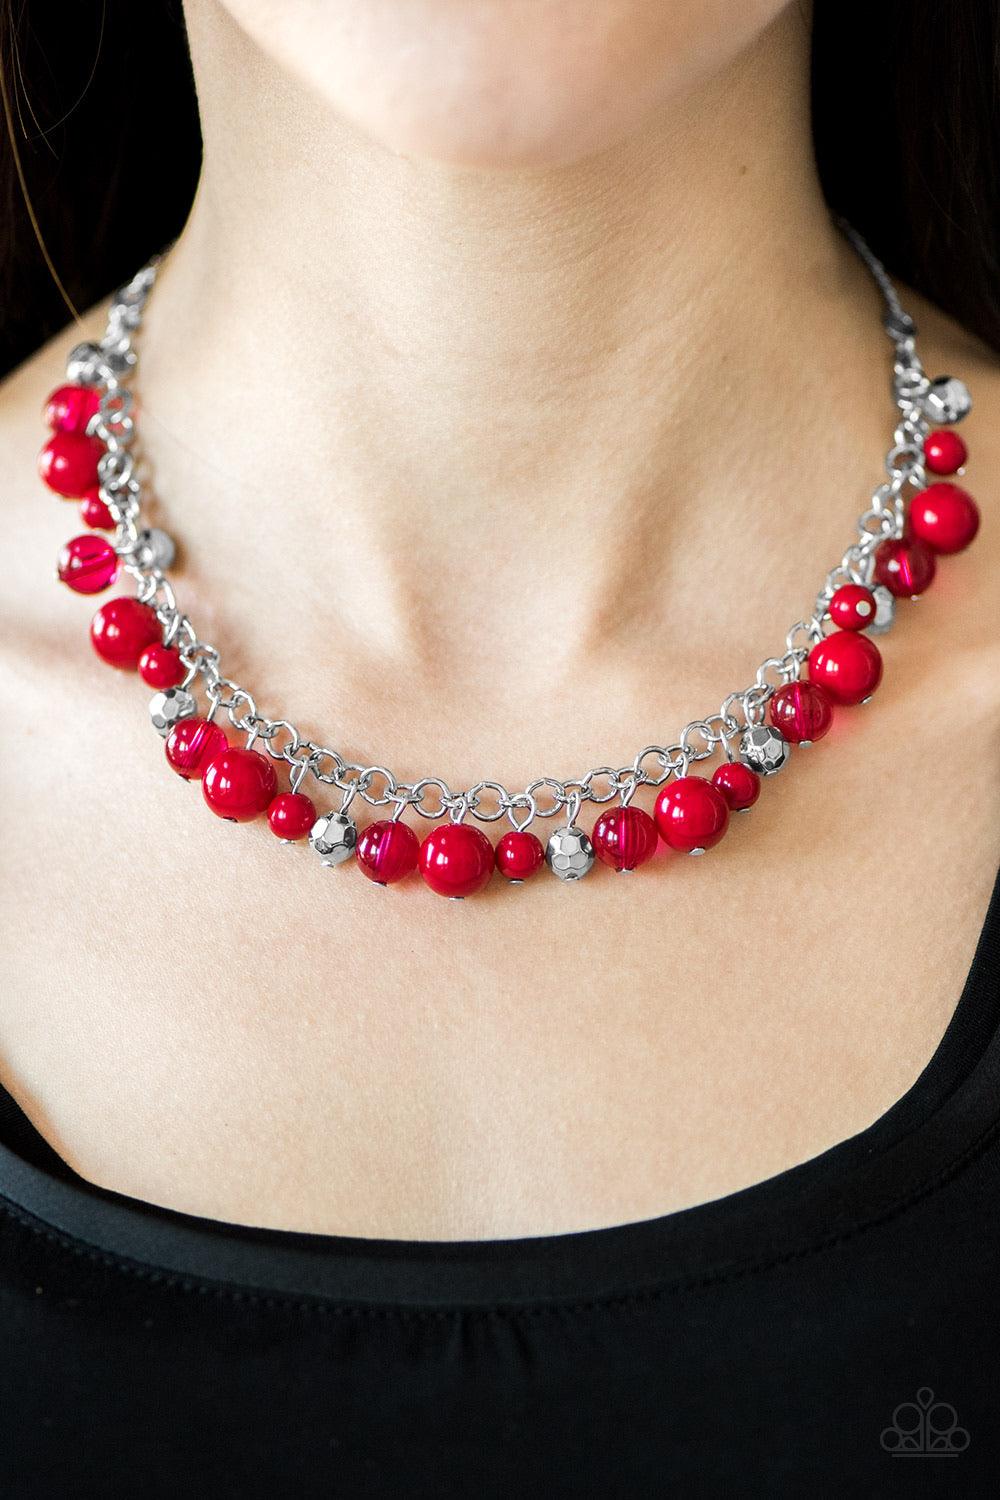 Paparazzi Accessories Wander With Wonder - Red Polished and opaque red beading trickle from a shimmery silver chain, creating a colorful fringe below the collar. Faceted silver beads are sprinkled between the colorful accents for a whimsical finish. Featu